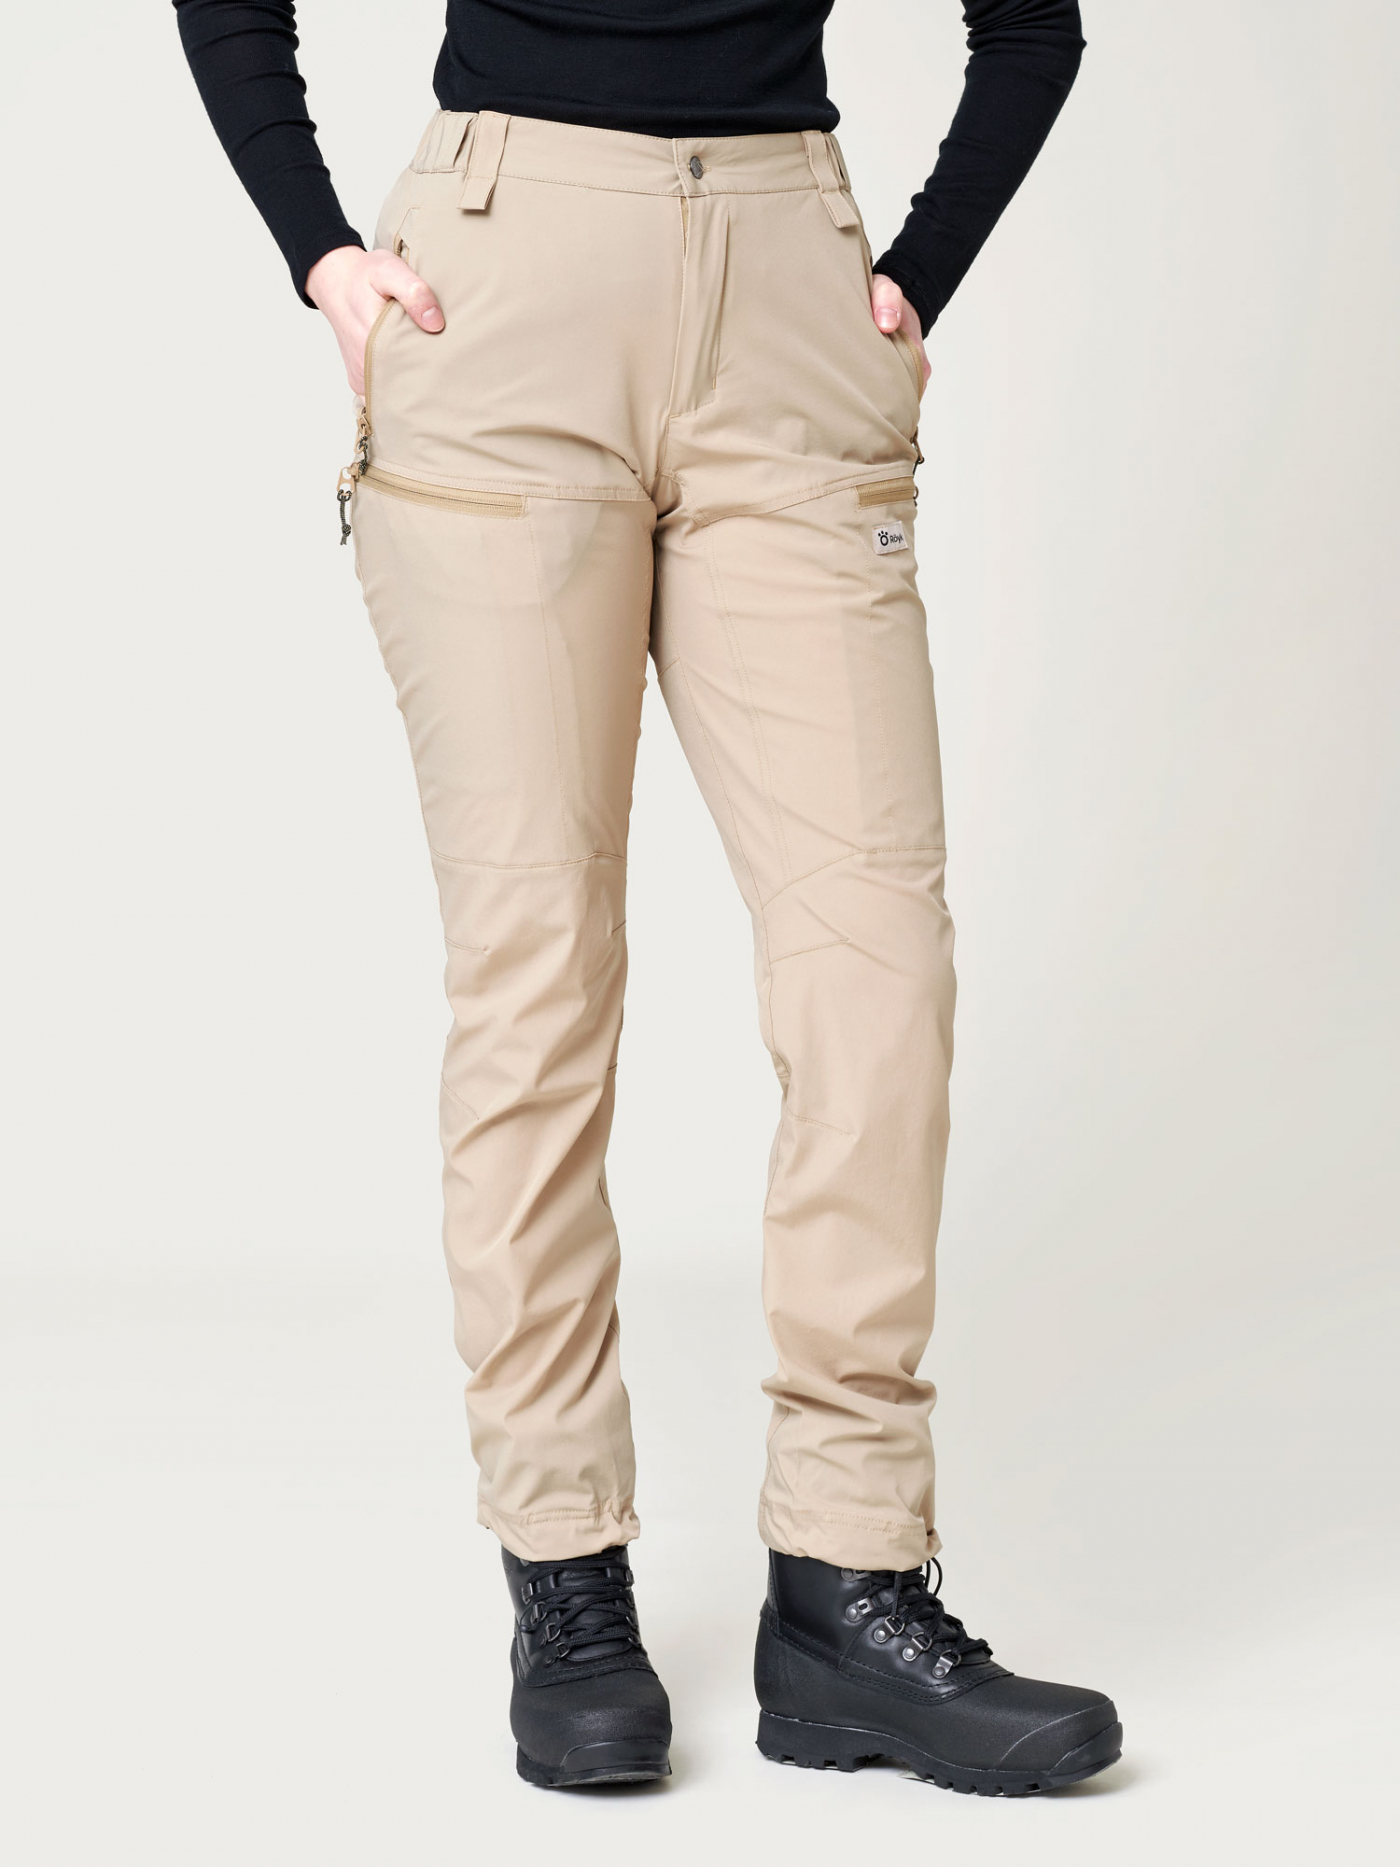 Buy Beige Track Pants for Women by Outryt Online | Ajio.com